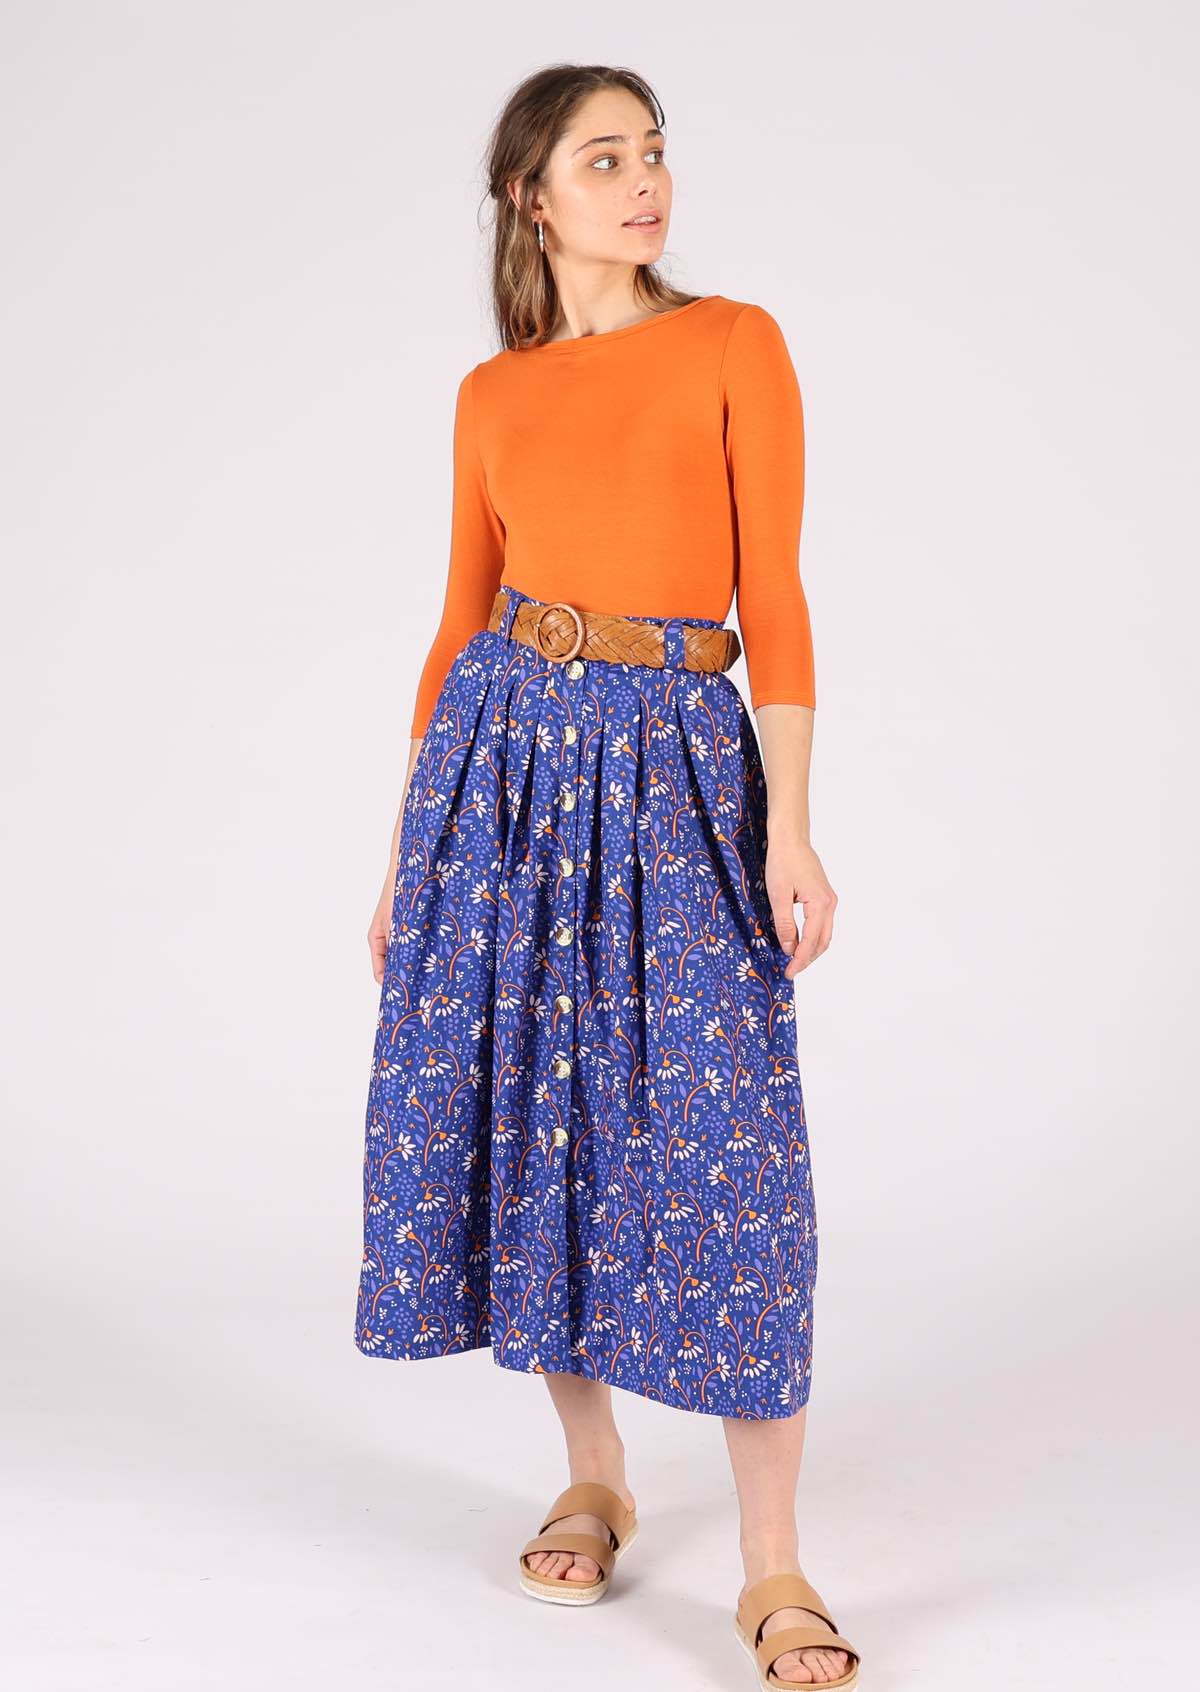 Model pairs blue cotton skirt with a plain long sleeve top, brown belt at the waist and shoes. 